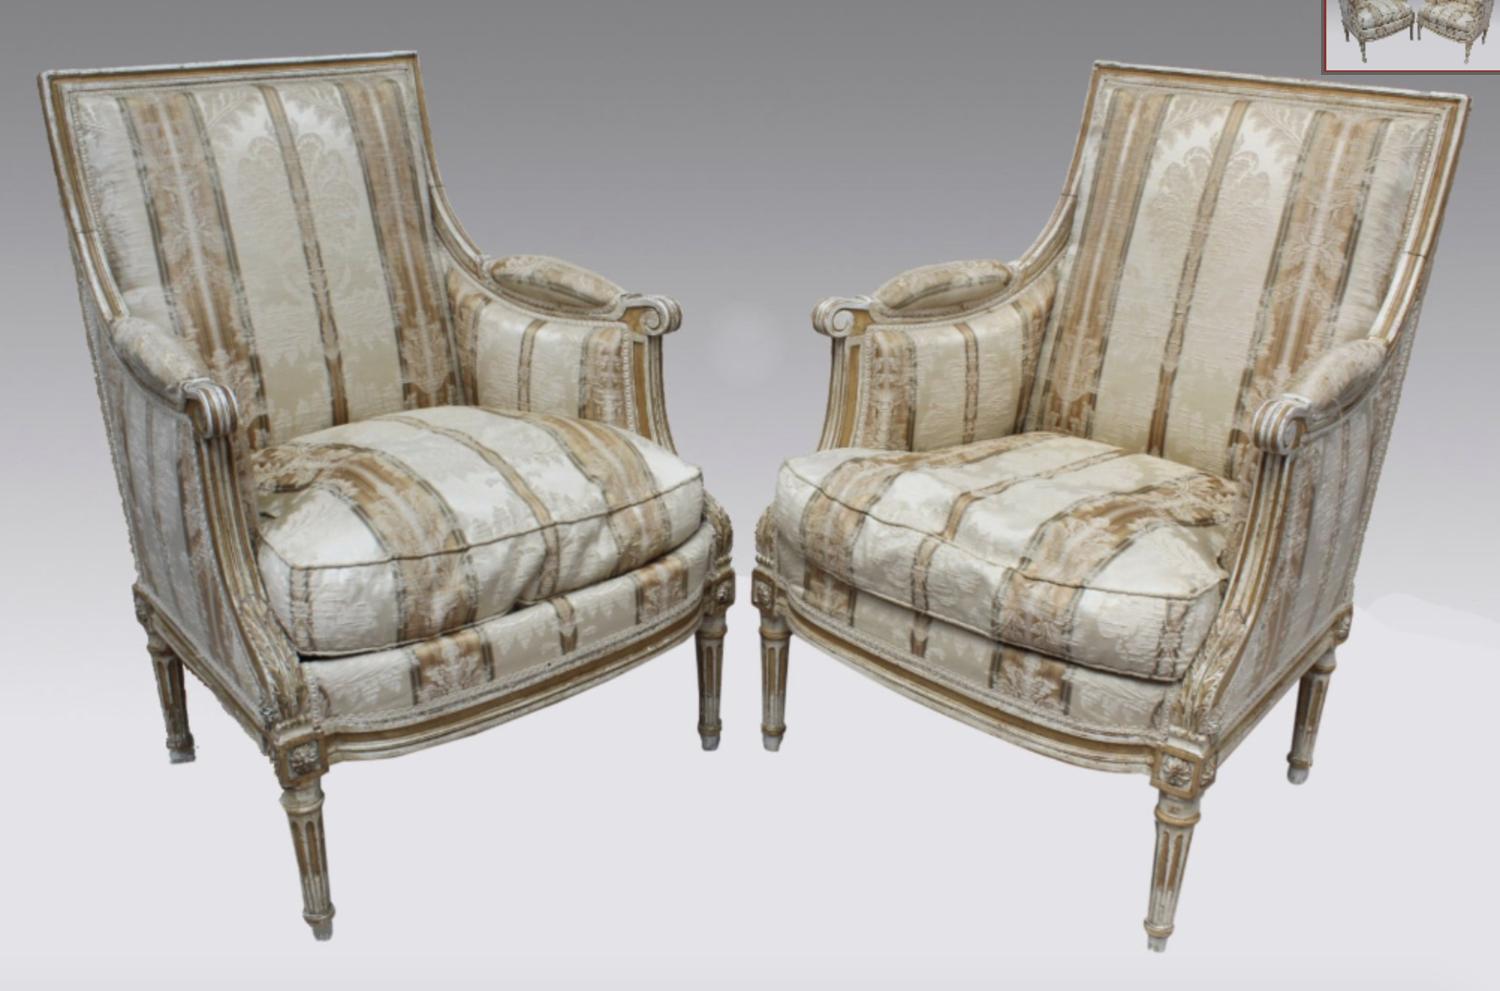 A PAIR OF BERGERE ARMCHAIRS LOUIS XVI STYLE